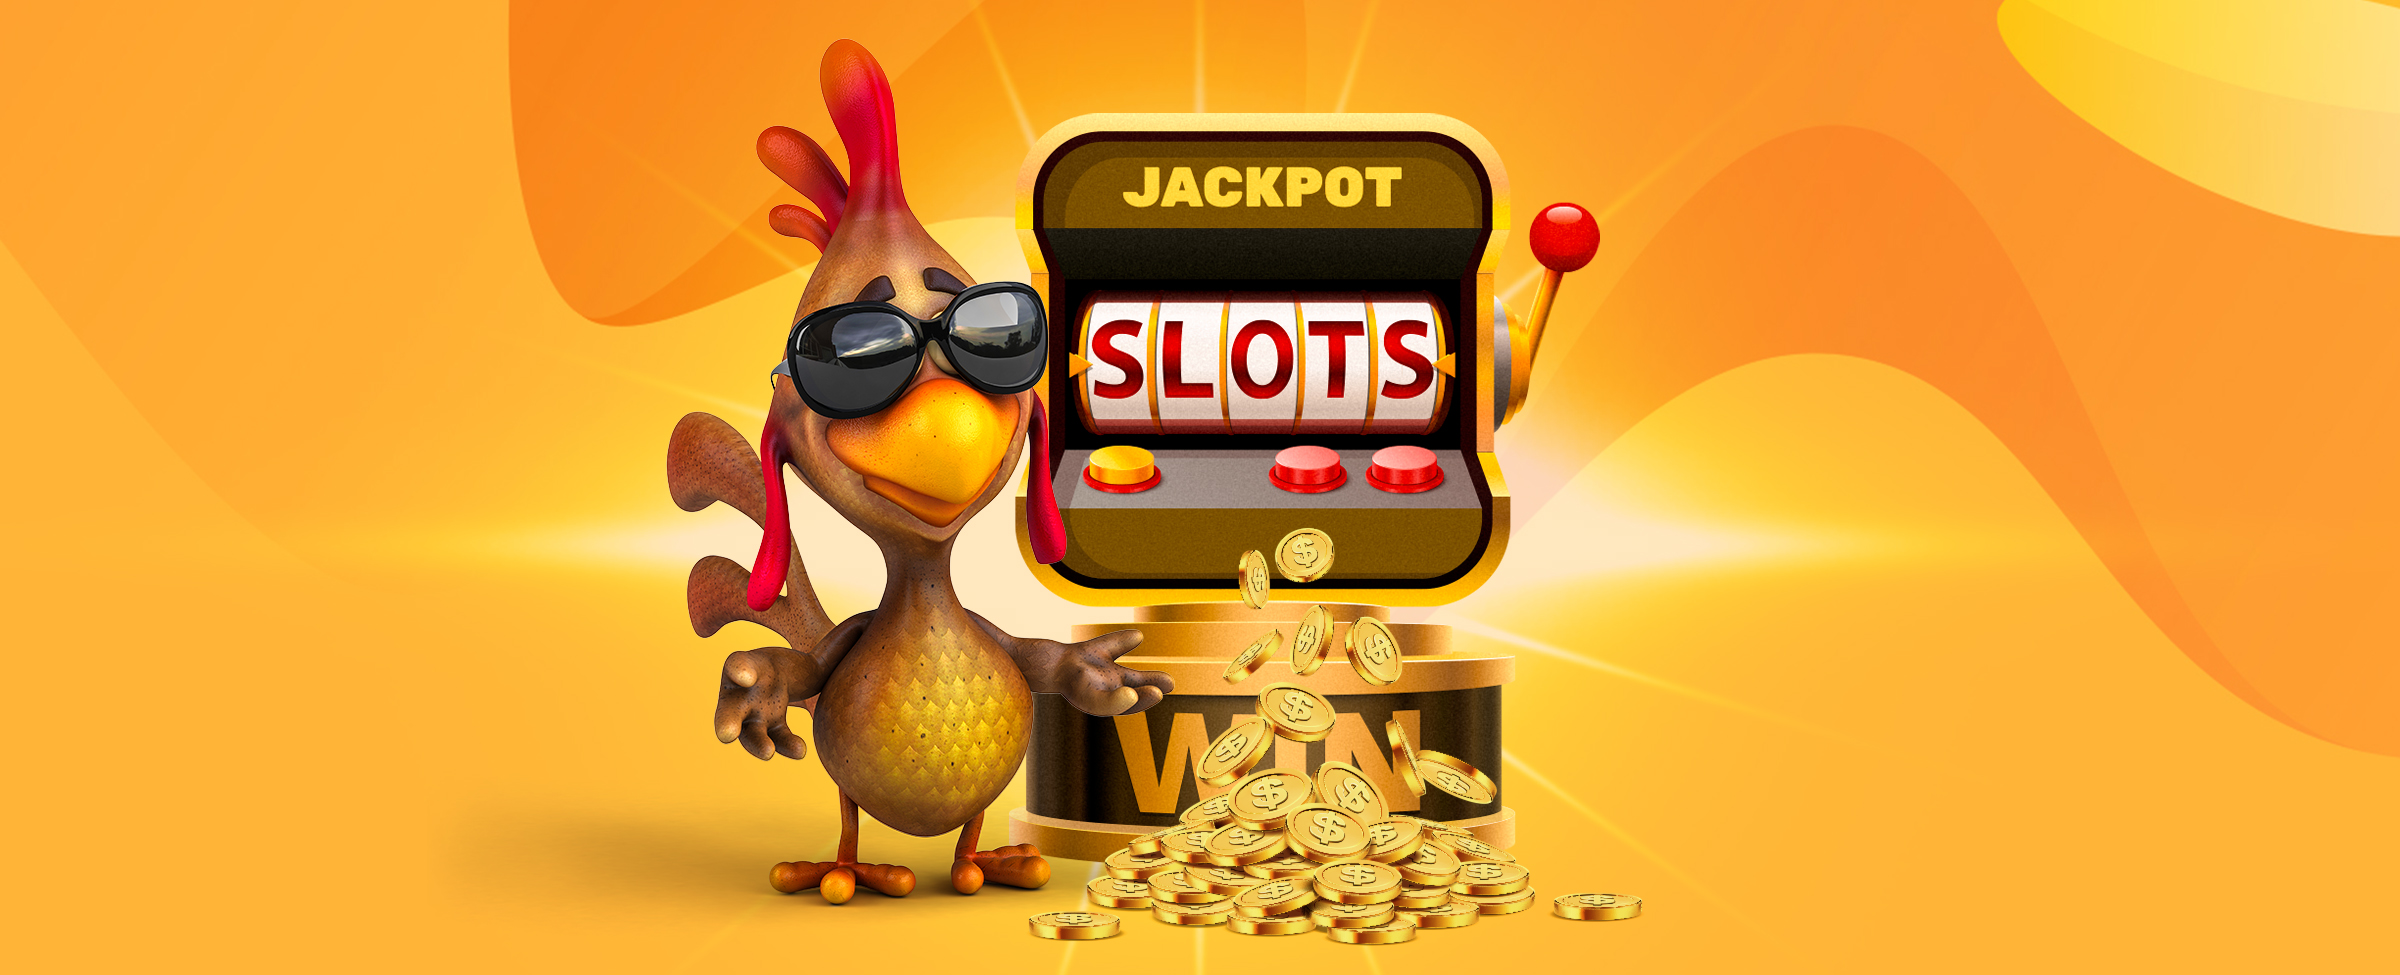 Jackpot lovers: SlotsLV is shining a light on these top slots jackpots to play. Let’s explore the ins and outs!